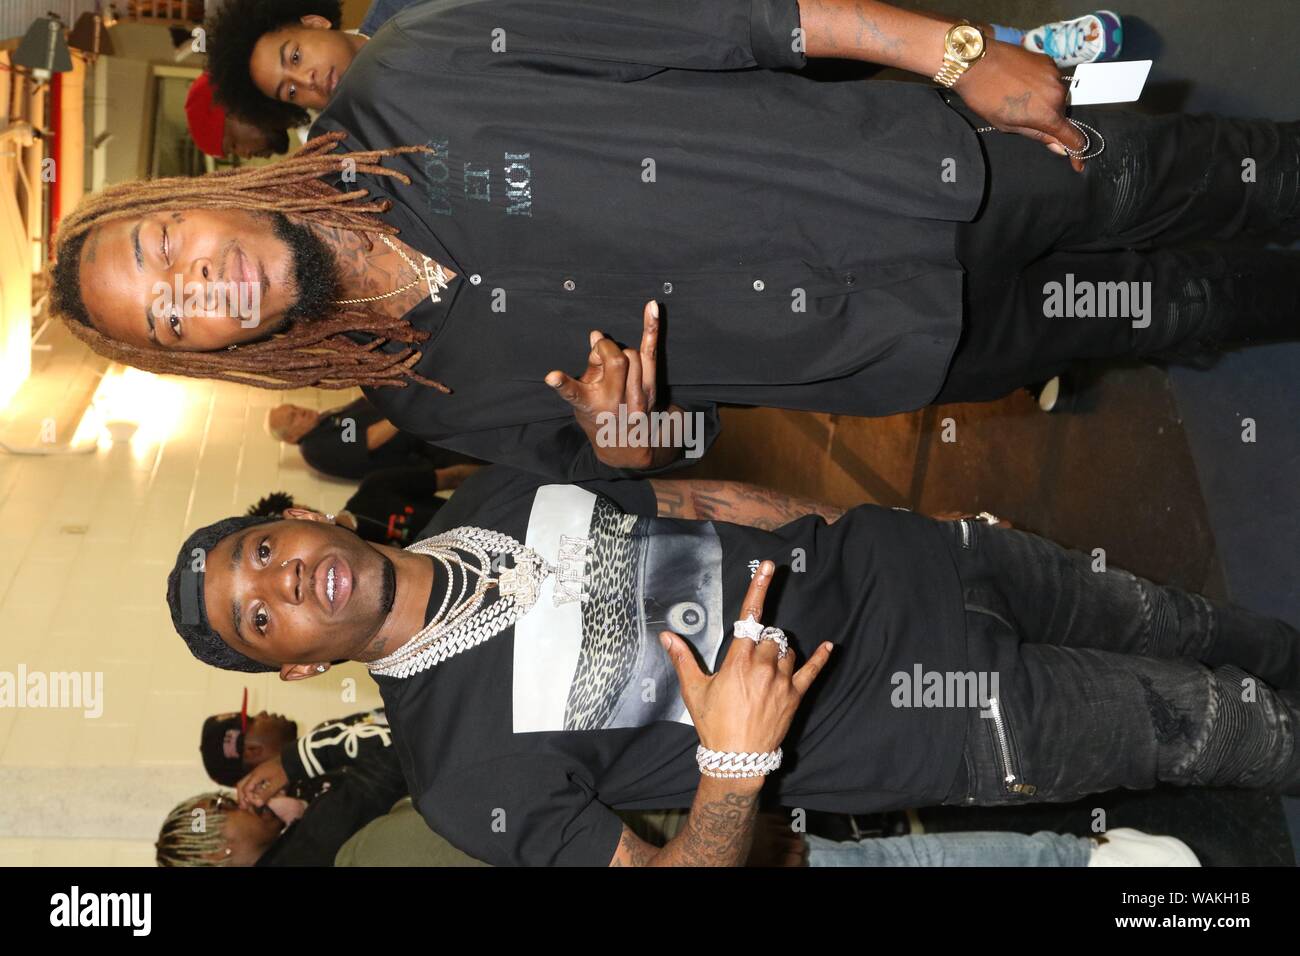 New York, NY, USA. 20th Aug, 2019. YFN Lucci & Fetty Wap backstage at the Power Season 6 Premiere August 20, 2019 at Madison Square Garden in New York City. Photo Credit: Walik Goshorn/Mediapunch/Alamy Live News Stock Photo